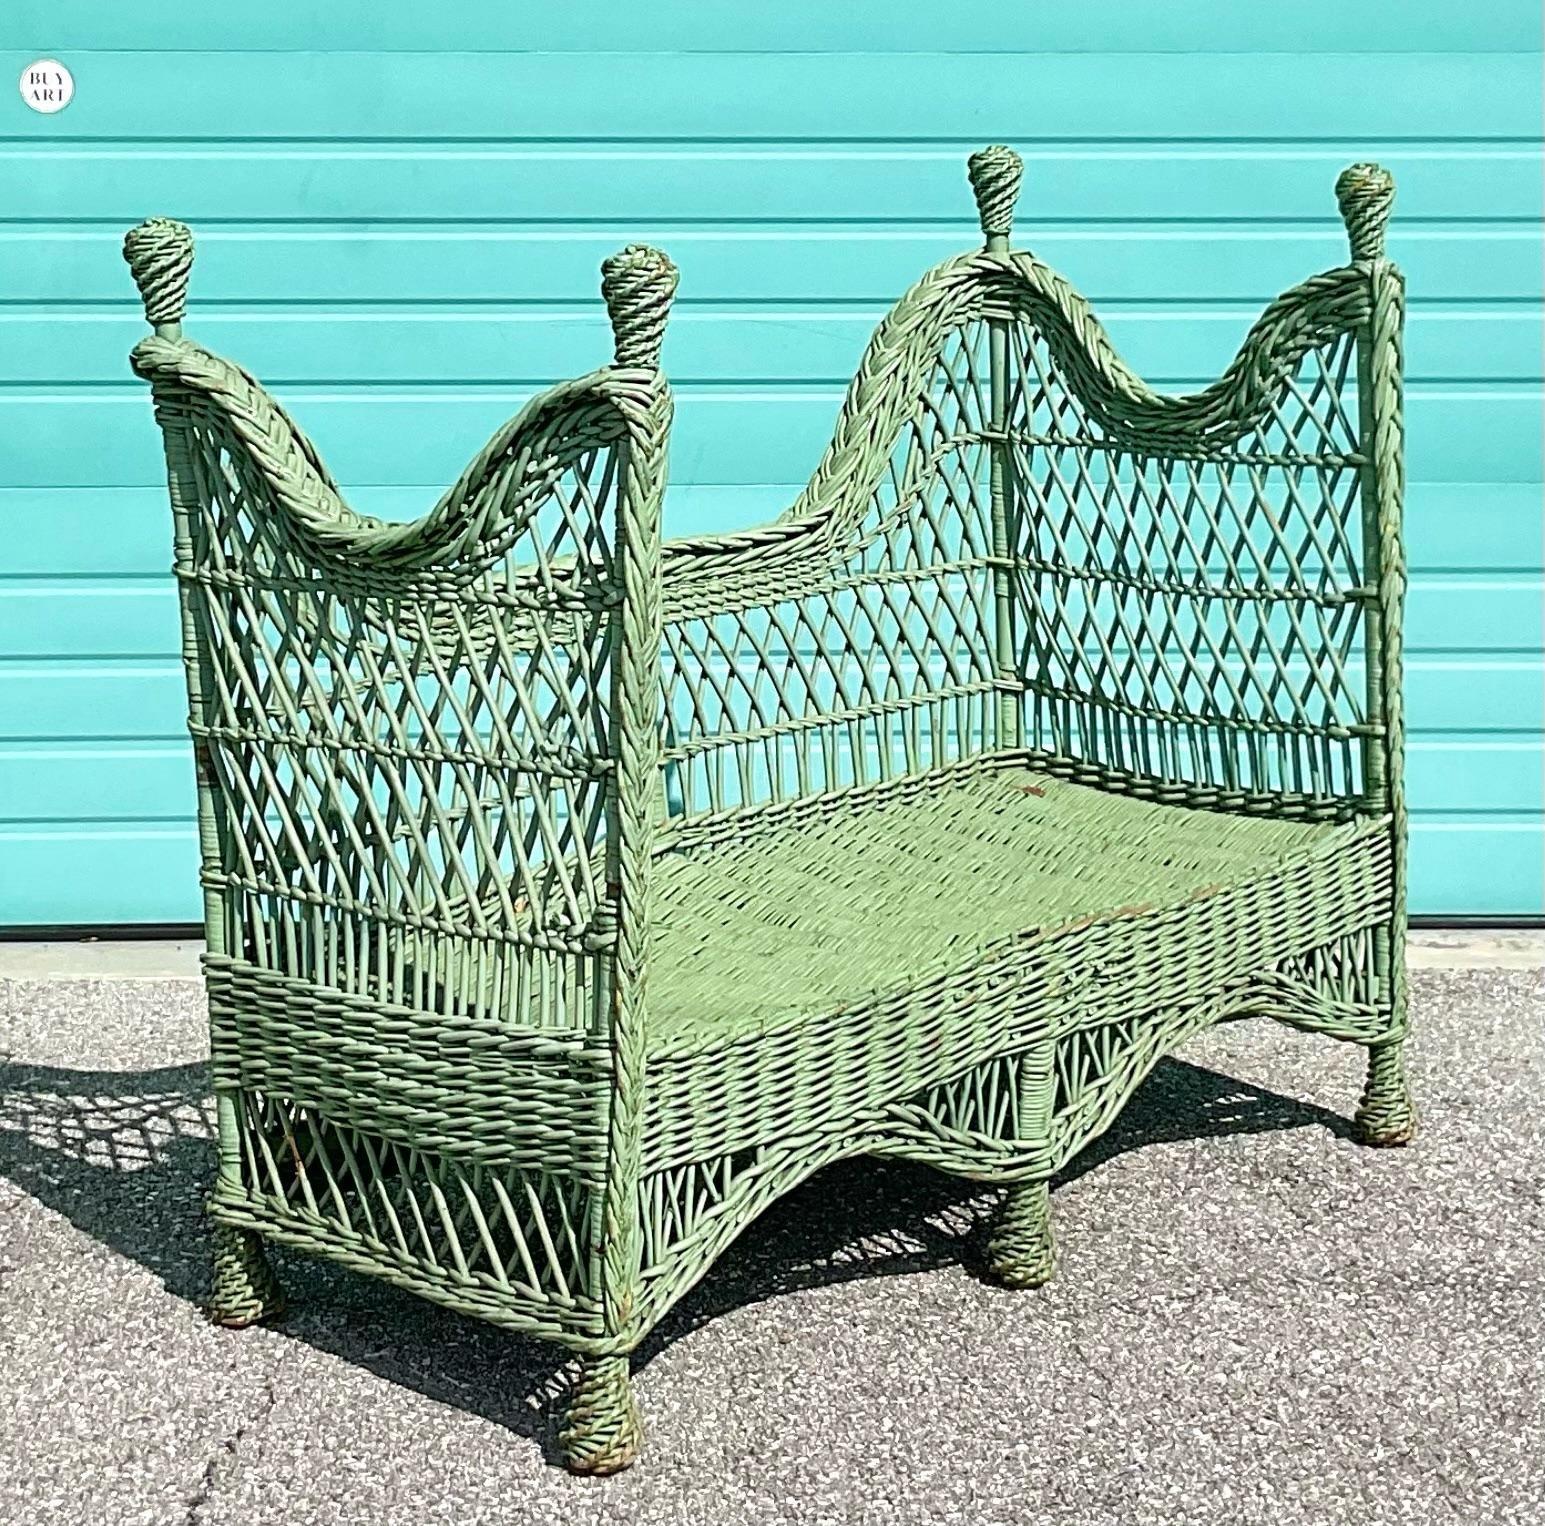 Exquisite early 1900s Victorian settee painted in a celadon color. Braid trim detailing and fully woven ball posts at all four corners make this piece one of the most intricate we have seen from the era.